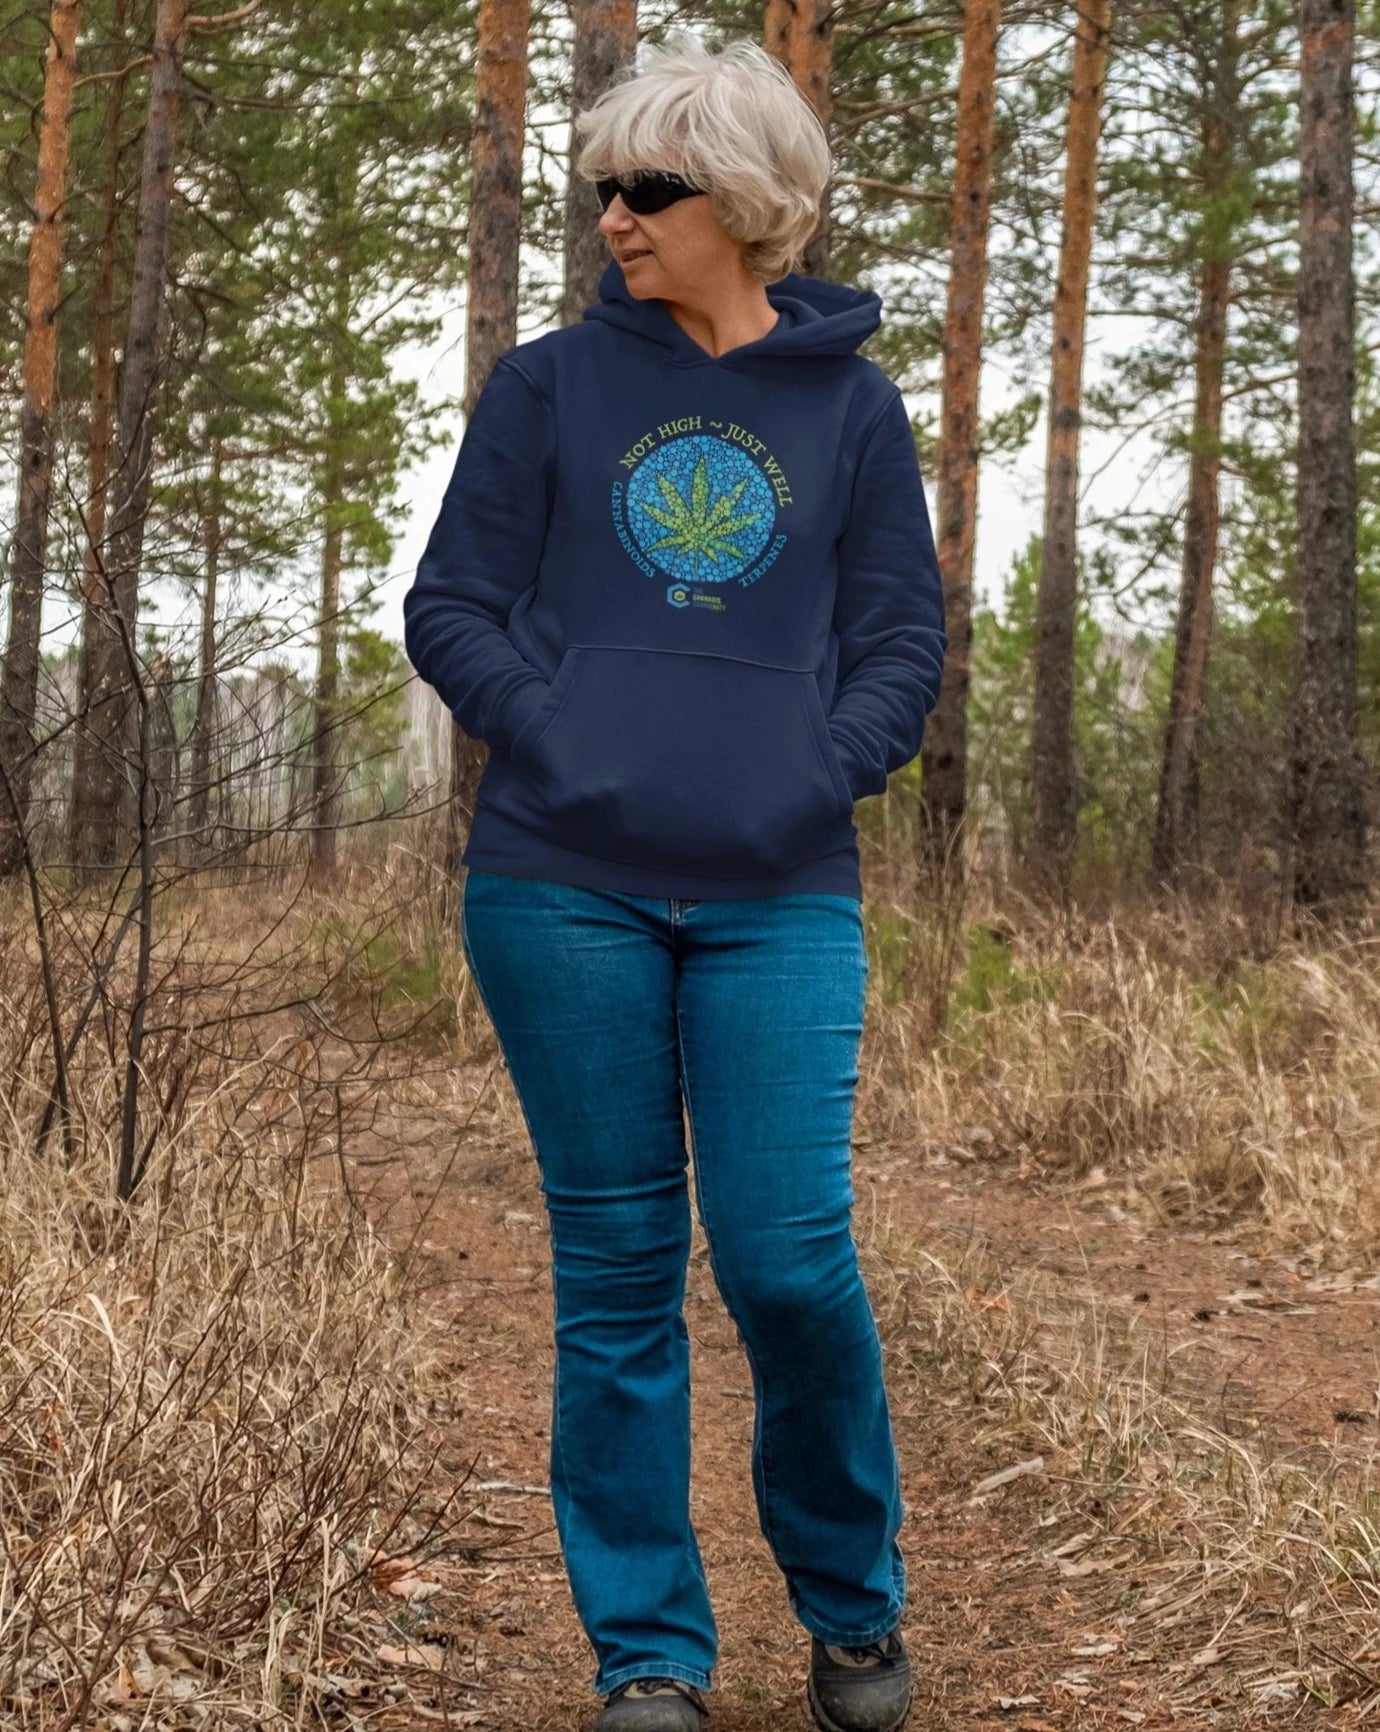 Woman wearing Not High Just Well Navy Hoodie walking through the woods